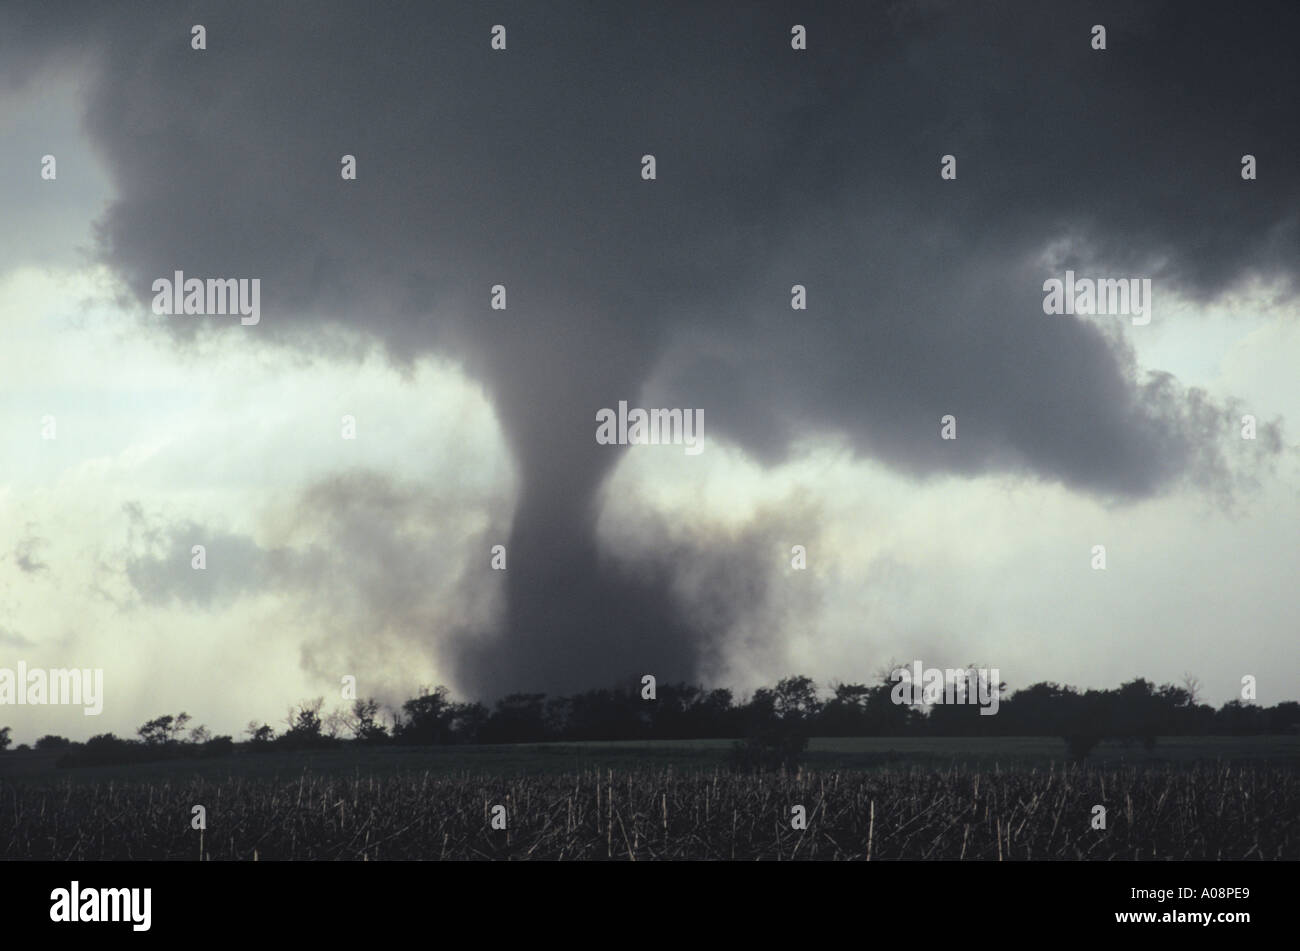 A tornado spins like a top from its wall cloud over farmland in Nebraska, USA. 2004 Stock Photo